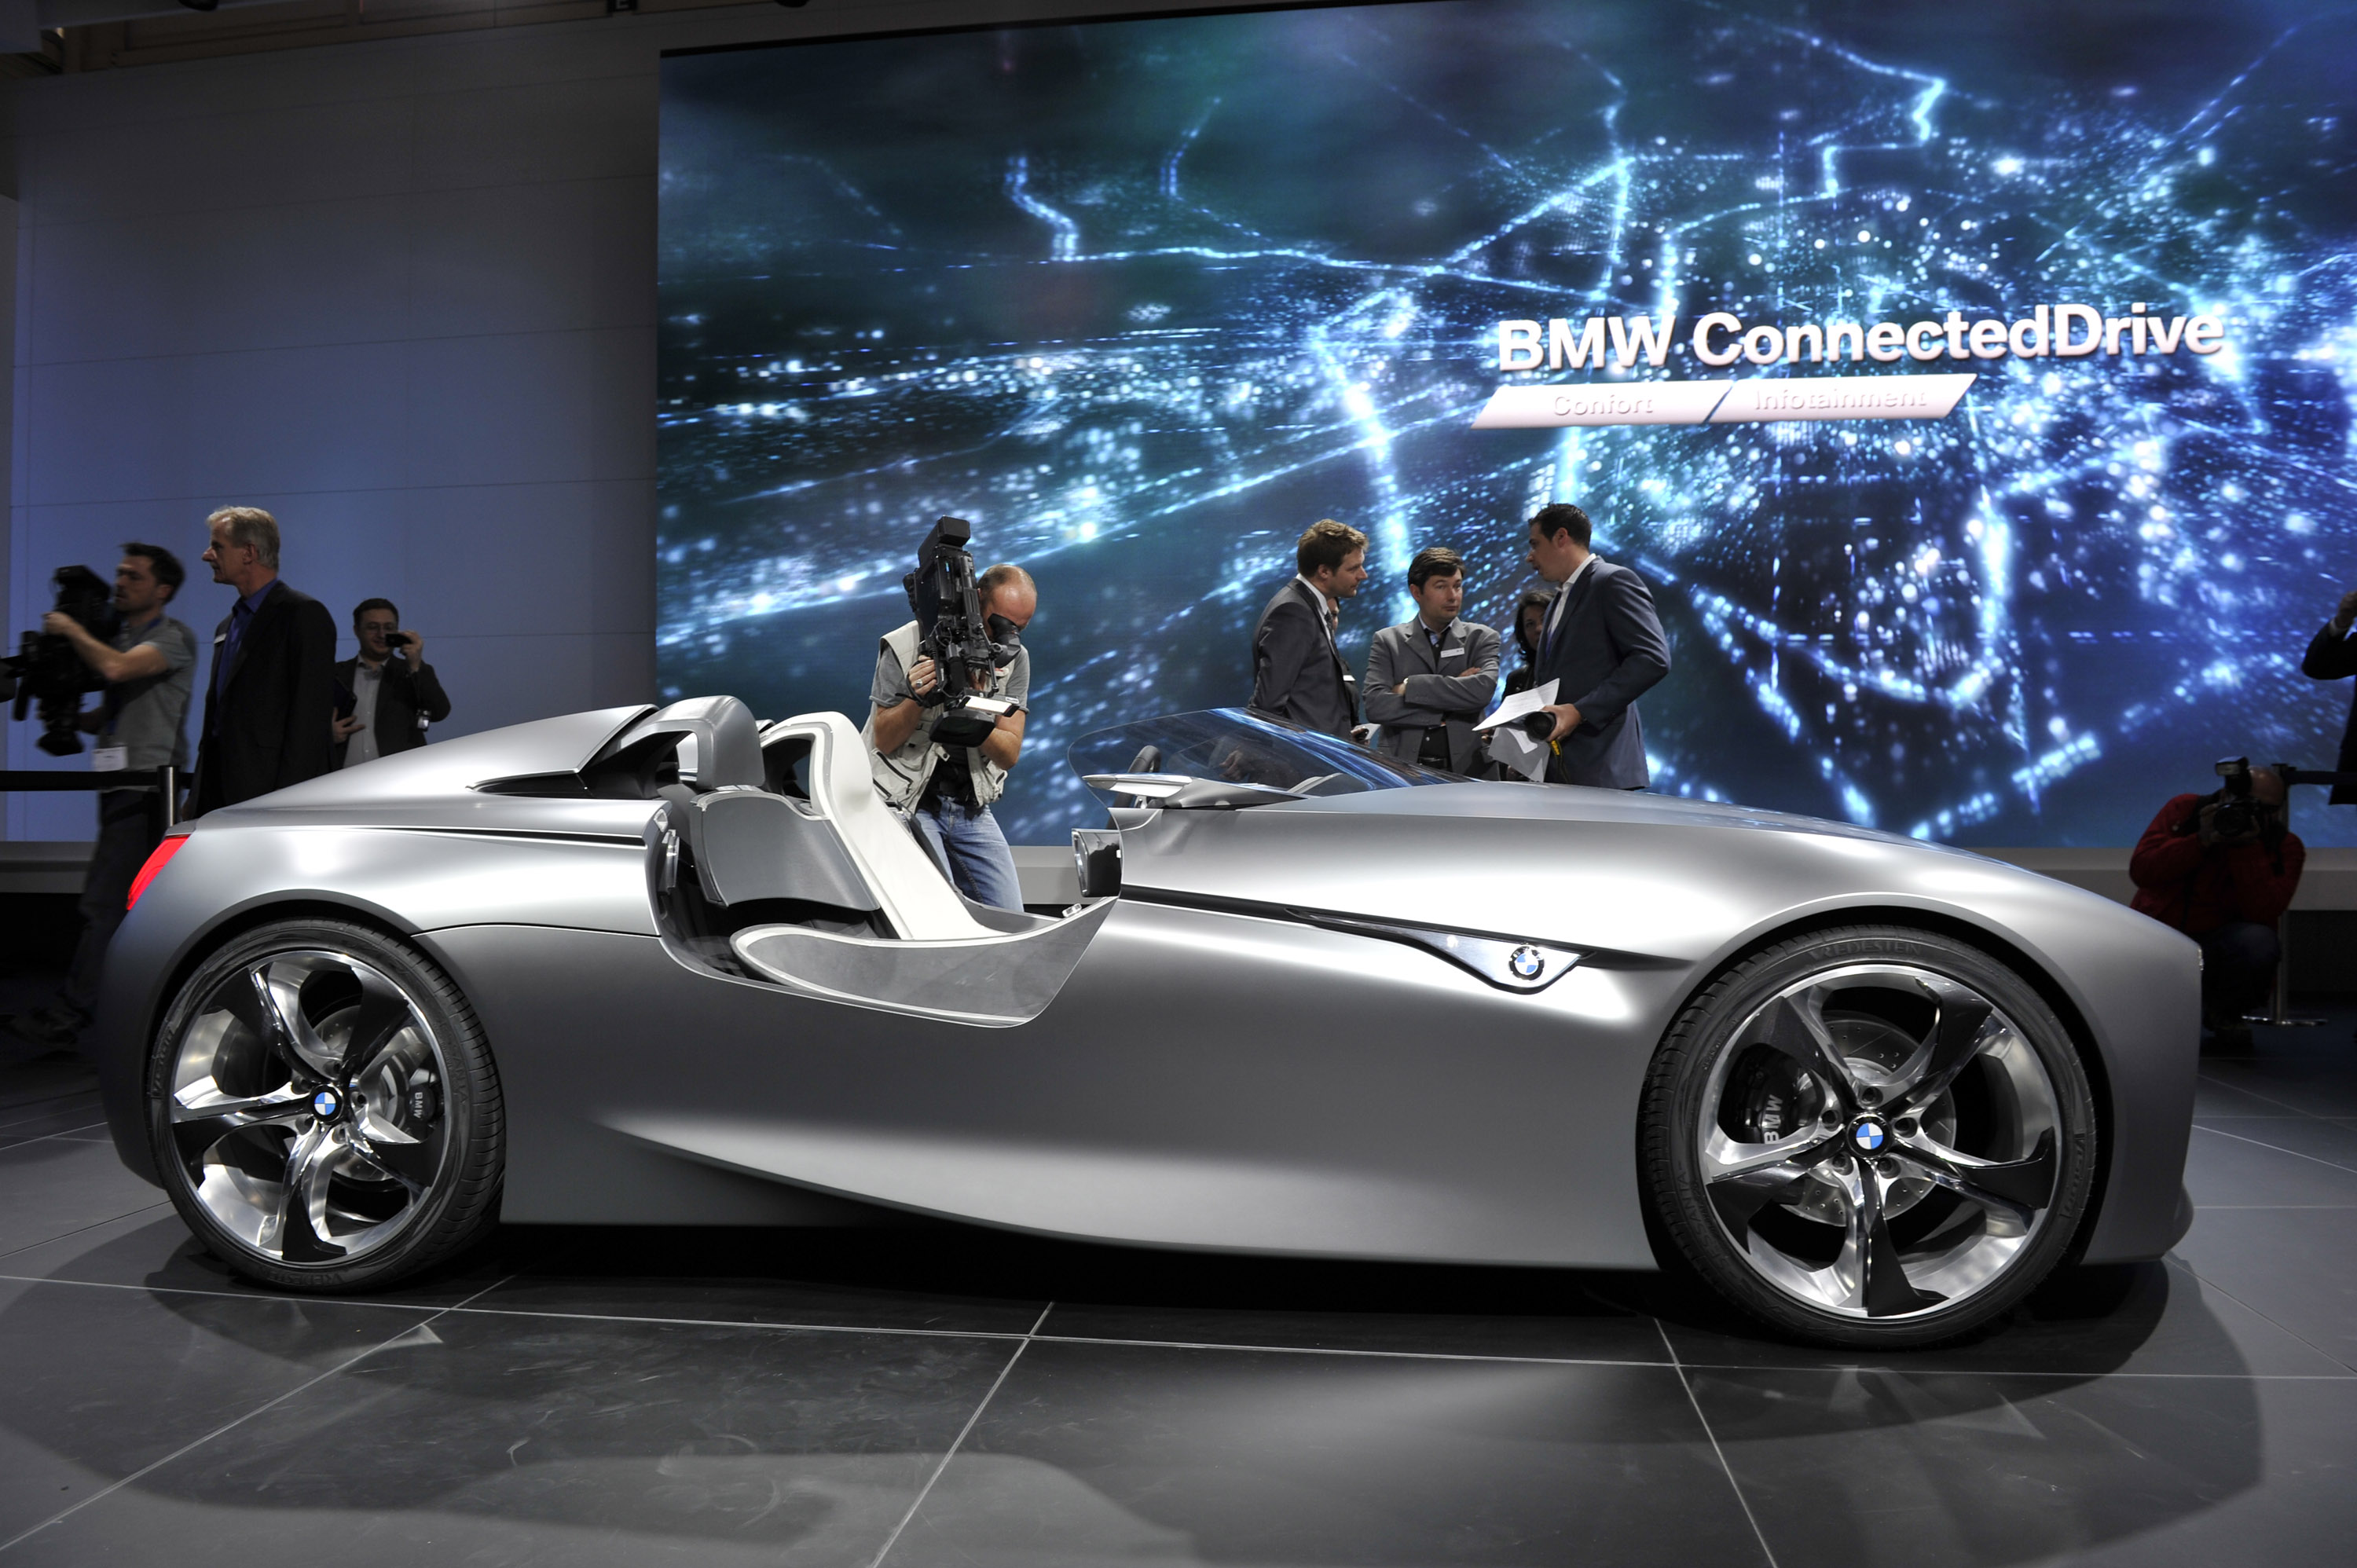 BMW Vision Connected Drive Geneva